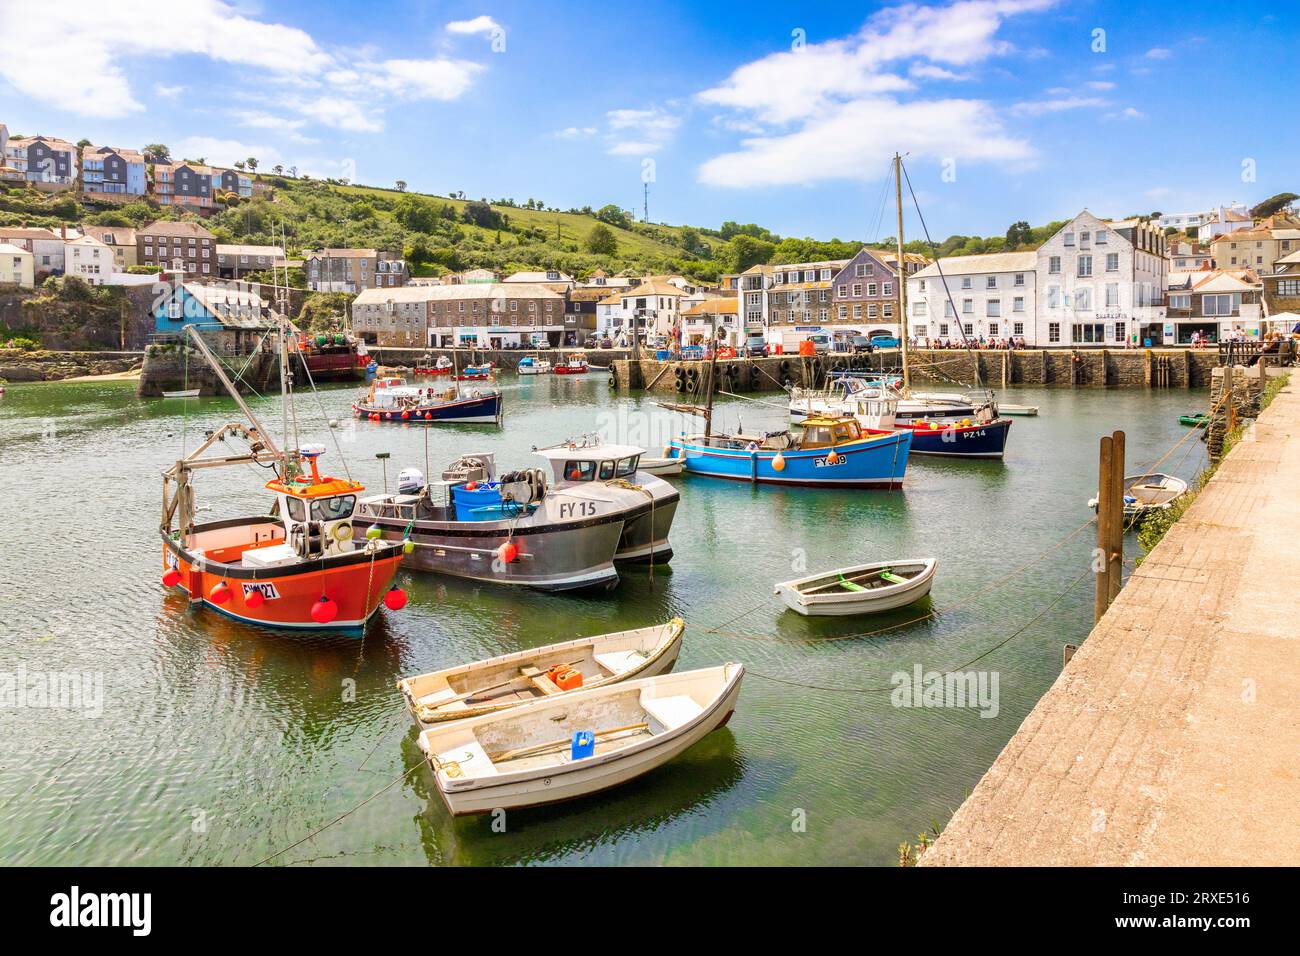 25 May 2023: Mevagissey, Roseland Peninsula, Cornwall, UK - The harbour at Mevagissey on a beautiful summer day during the 2023 heatwave, with boats... Stock Photo